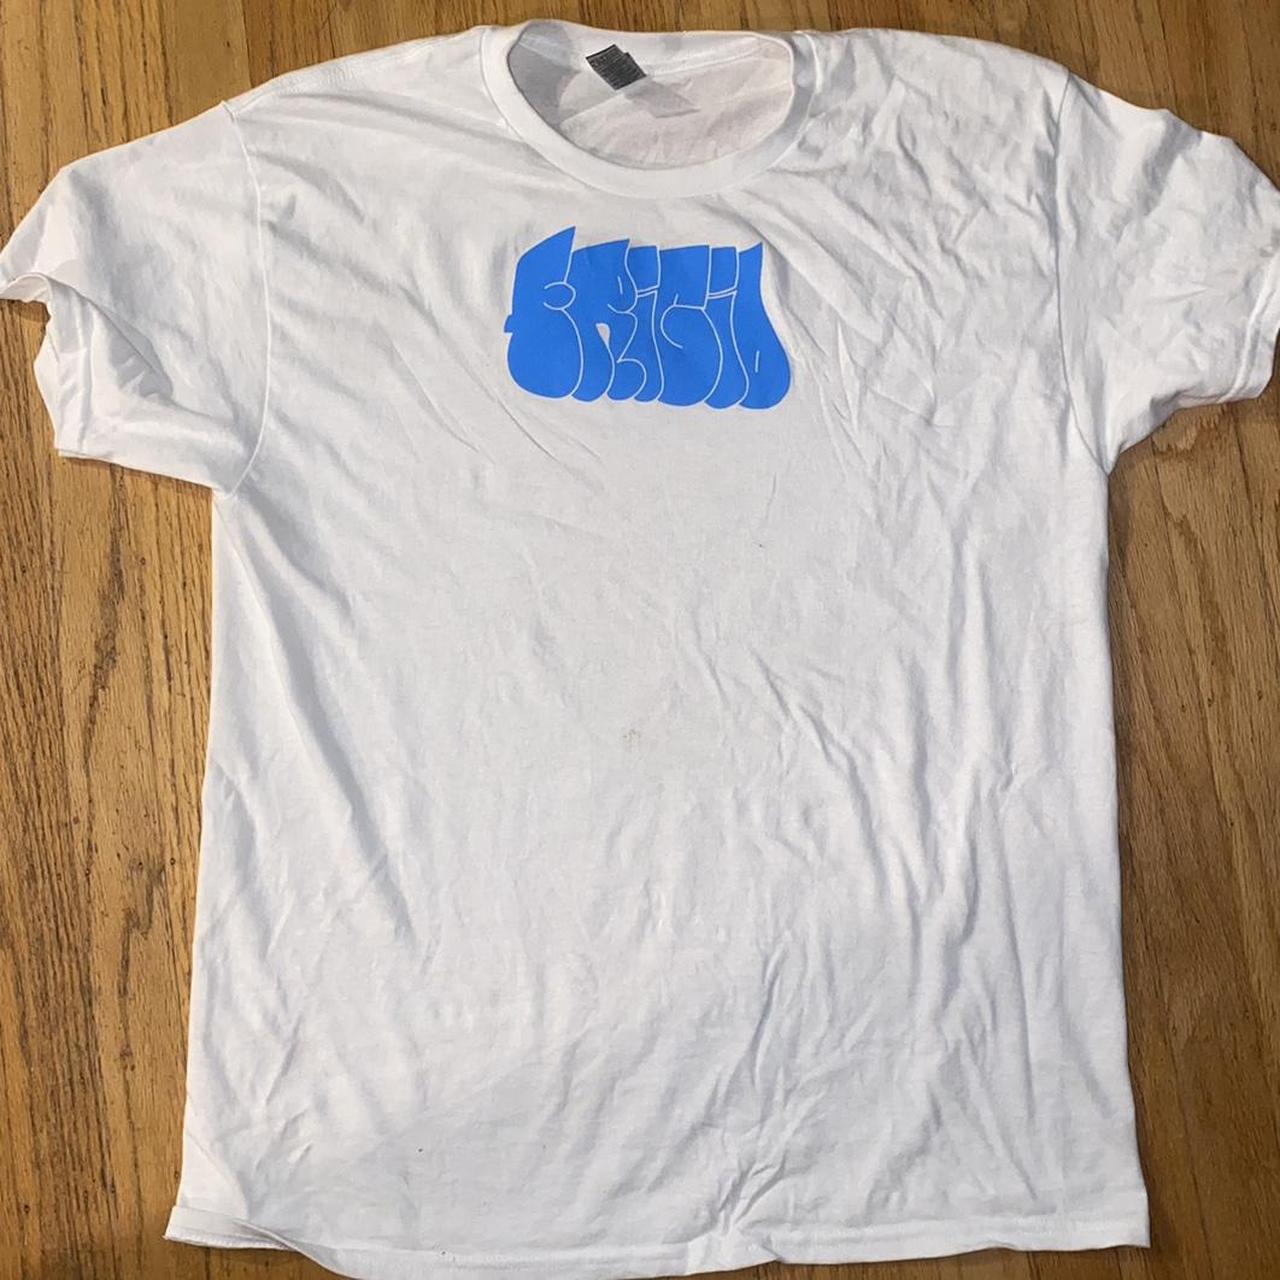 Men's White and Blue T-shirt